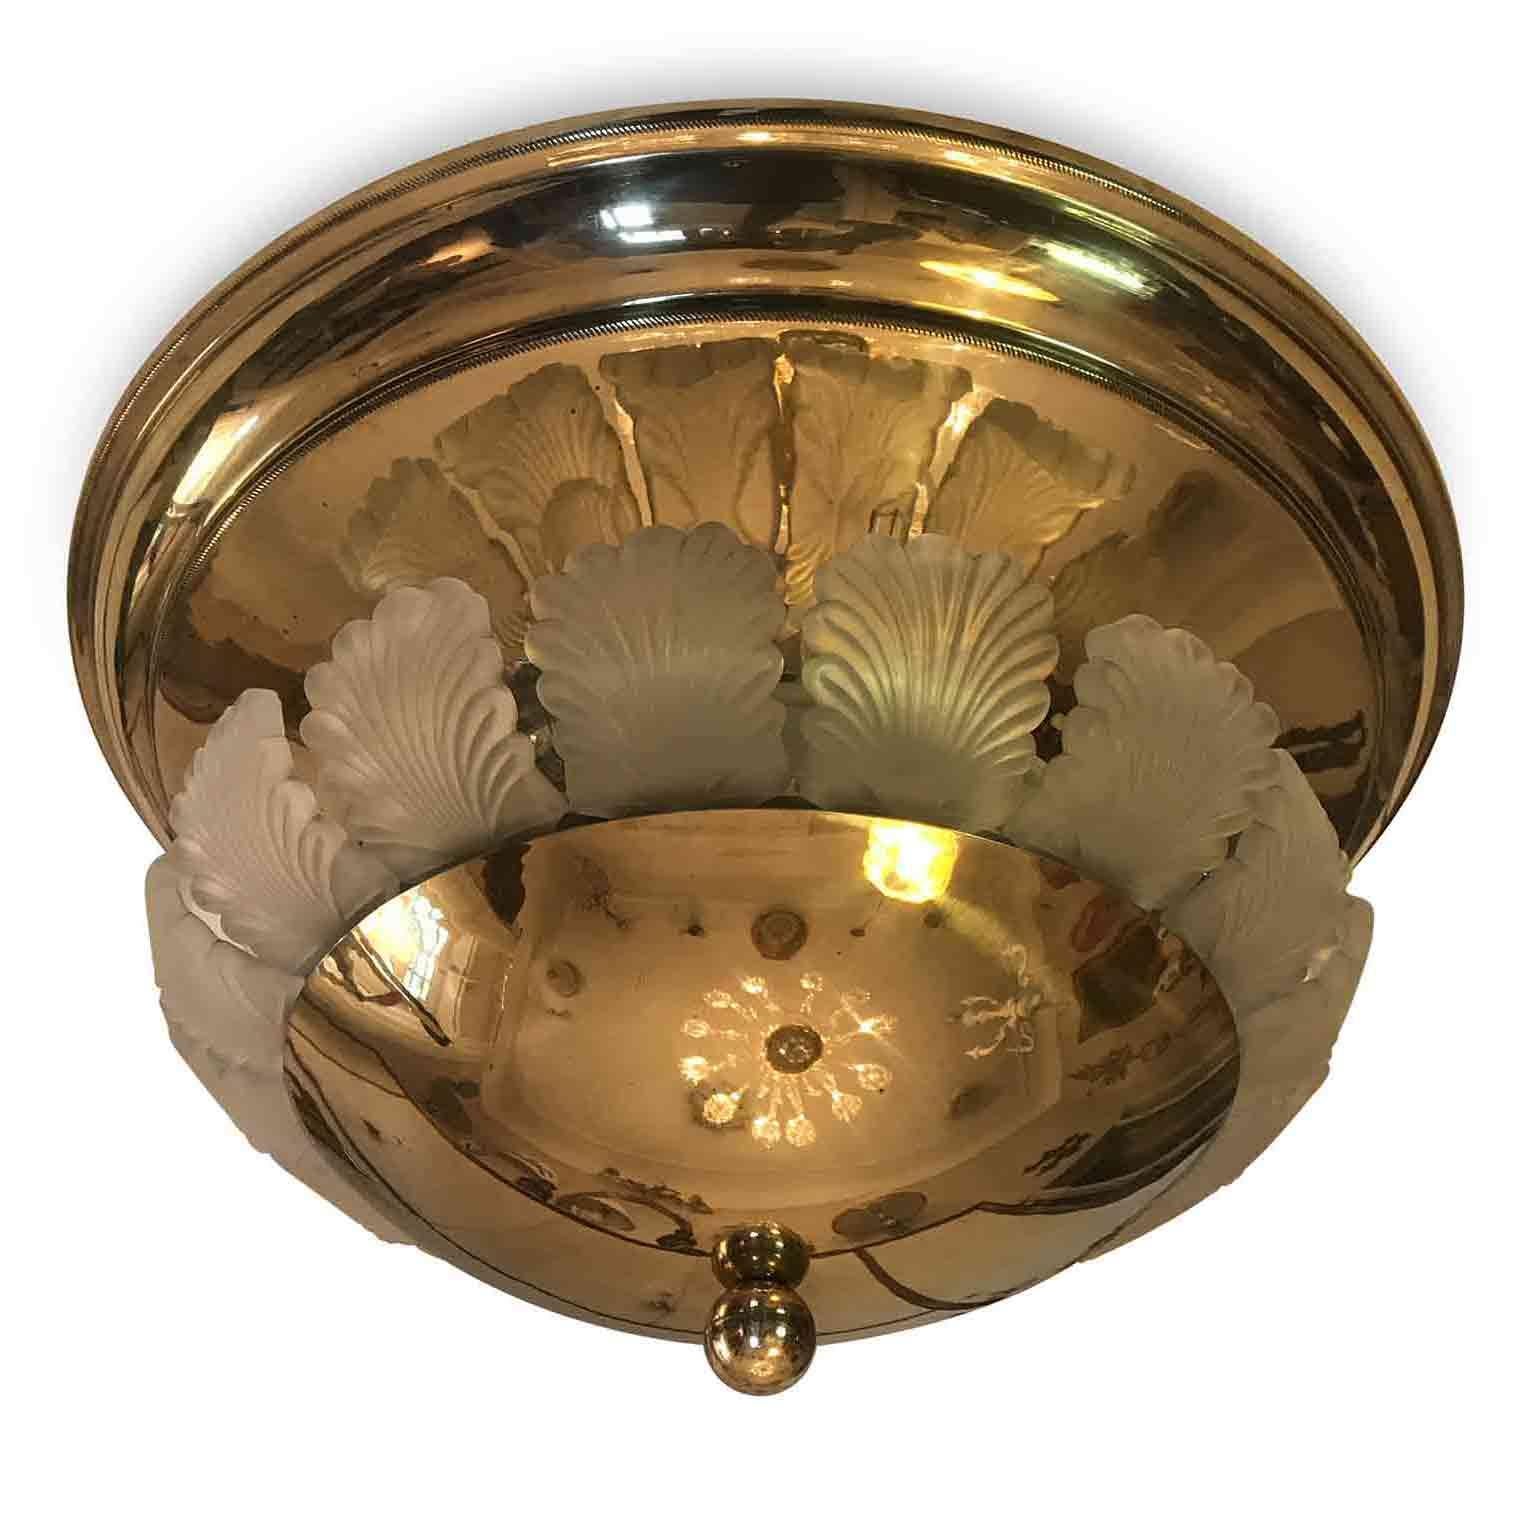 Italian 1980s ceiling light brass by Banci Firenze, an right-light circular brass ceiling fixture decorated with palmetta shaped frosted glass shades, leaves, hiding the eight E14 light bulbs.

Made in Italy, circa 1980s. It comes from a private